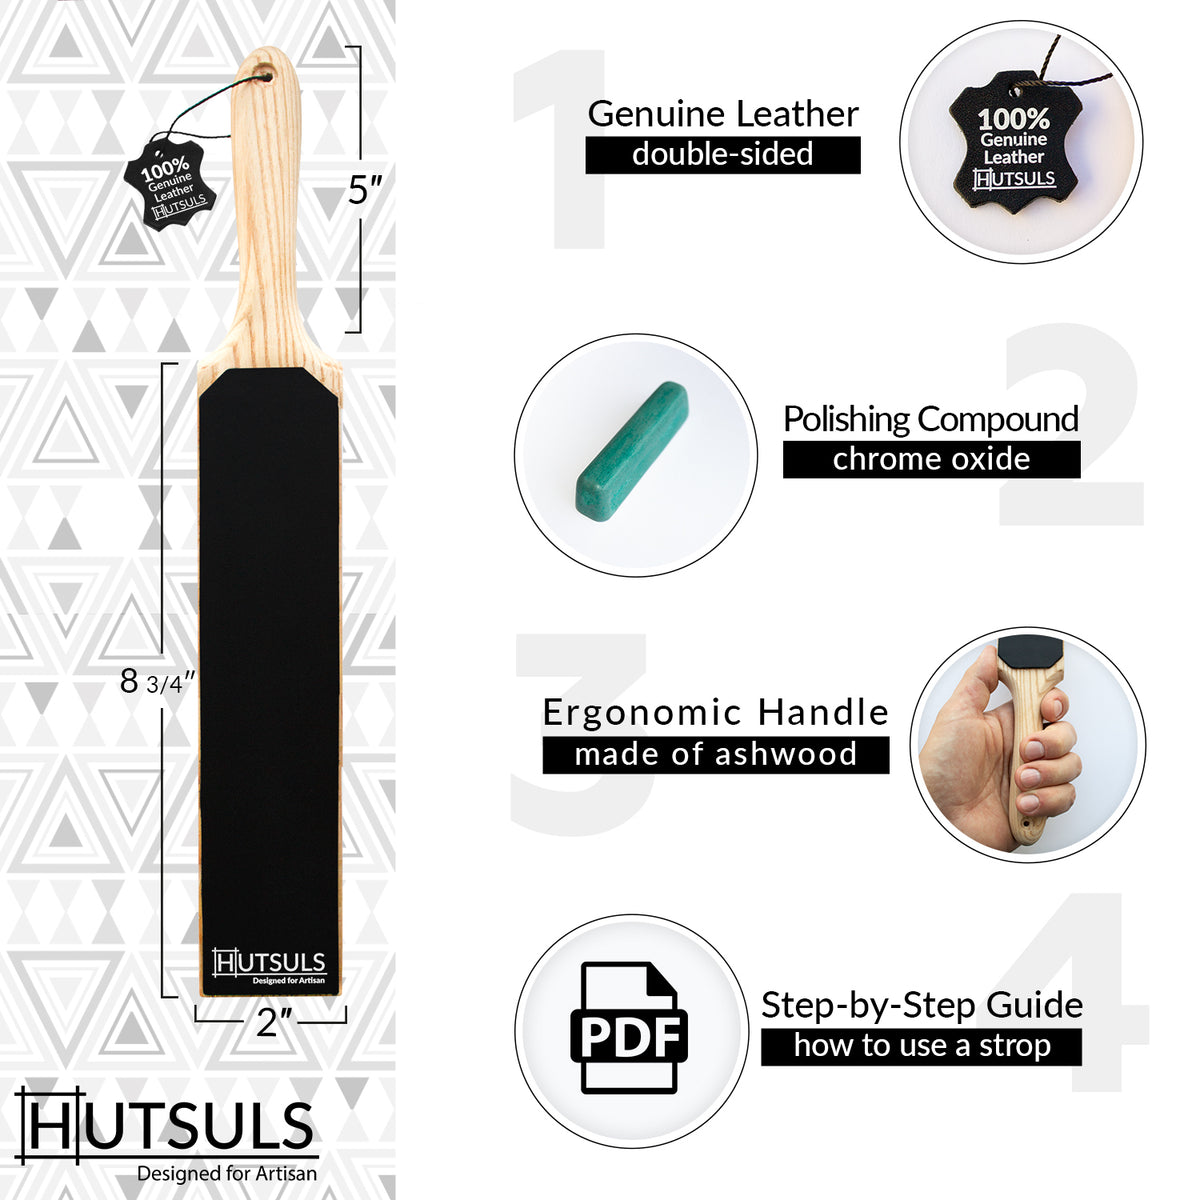 HUTSULS Spoon Carving Knife for Beginners - Right-Handed Razor Sharp Wood  Carving Hook Knife Tool